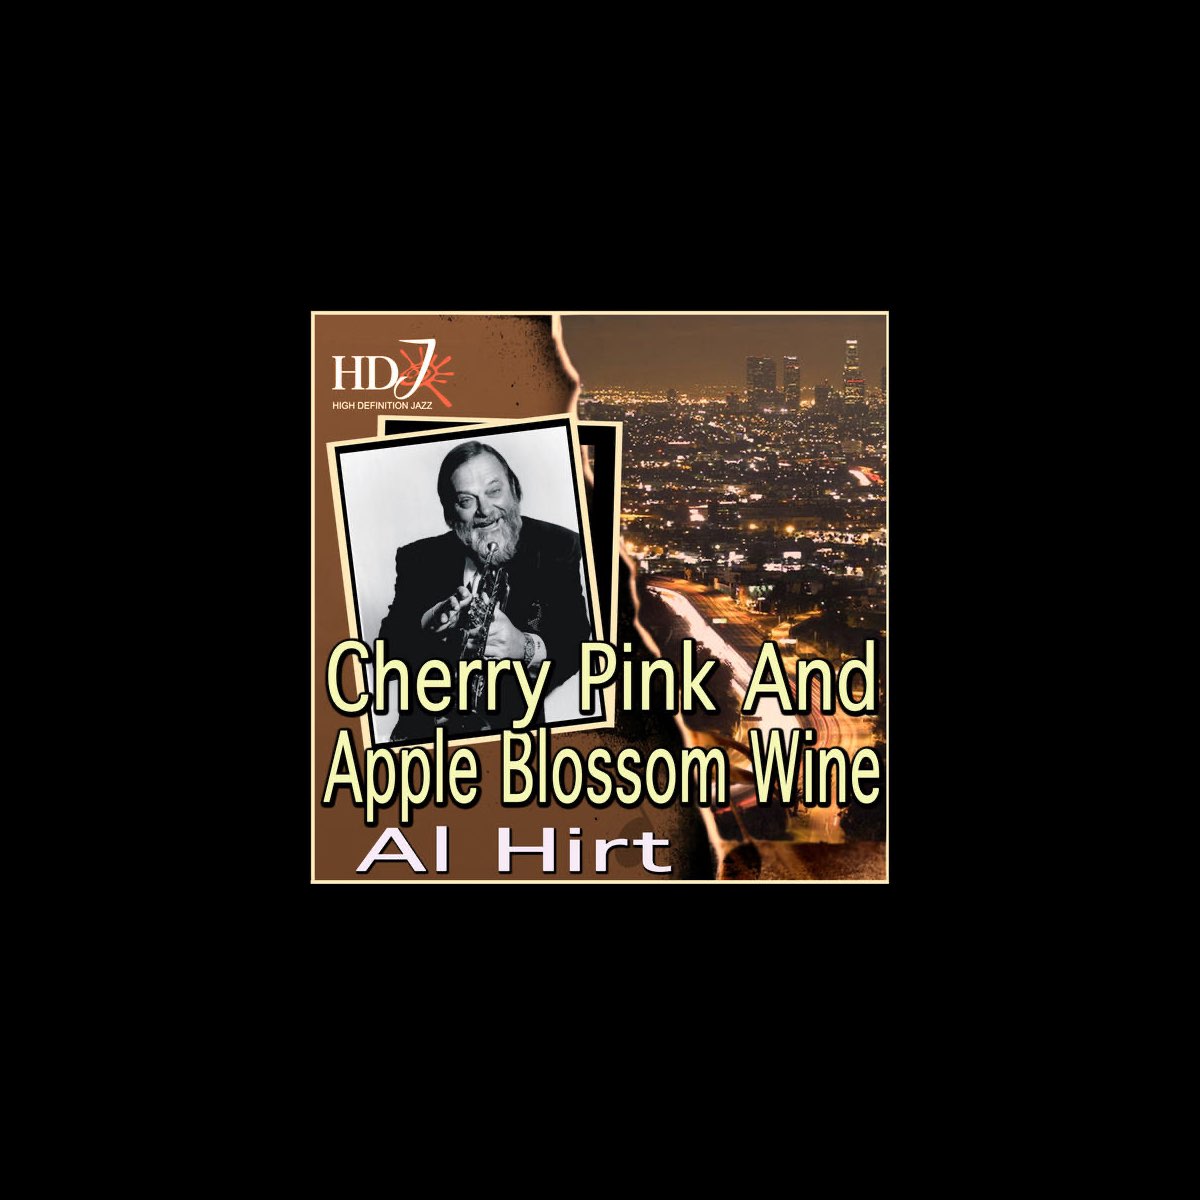 ‎Cherry Pink And Apple Blossom Wine by Al Hirt on Apple Music